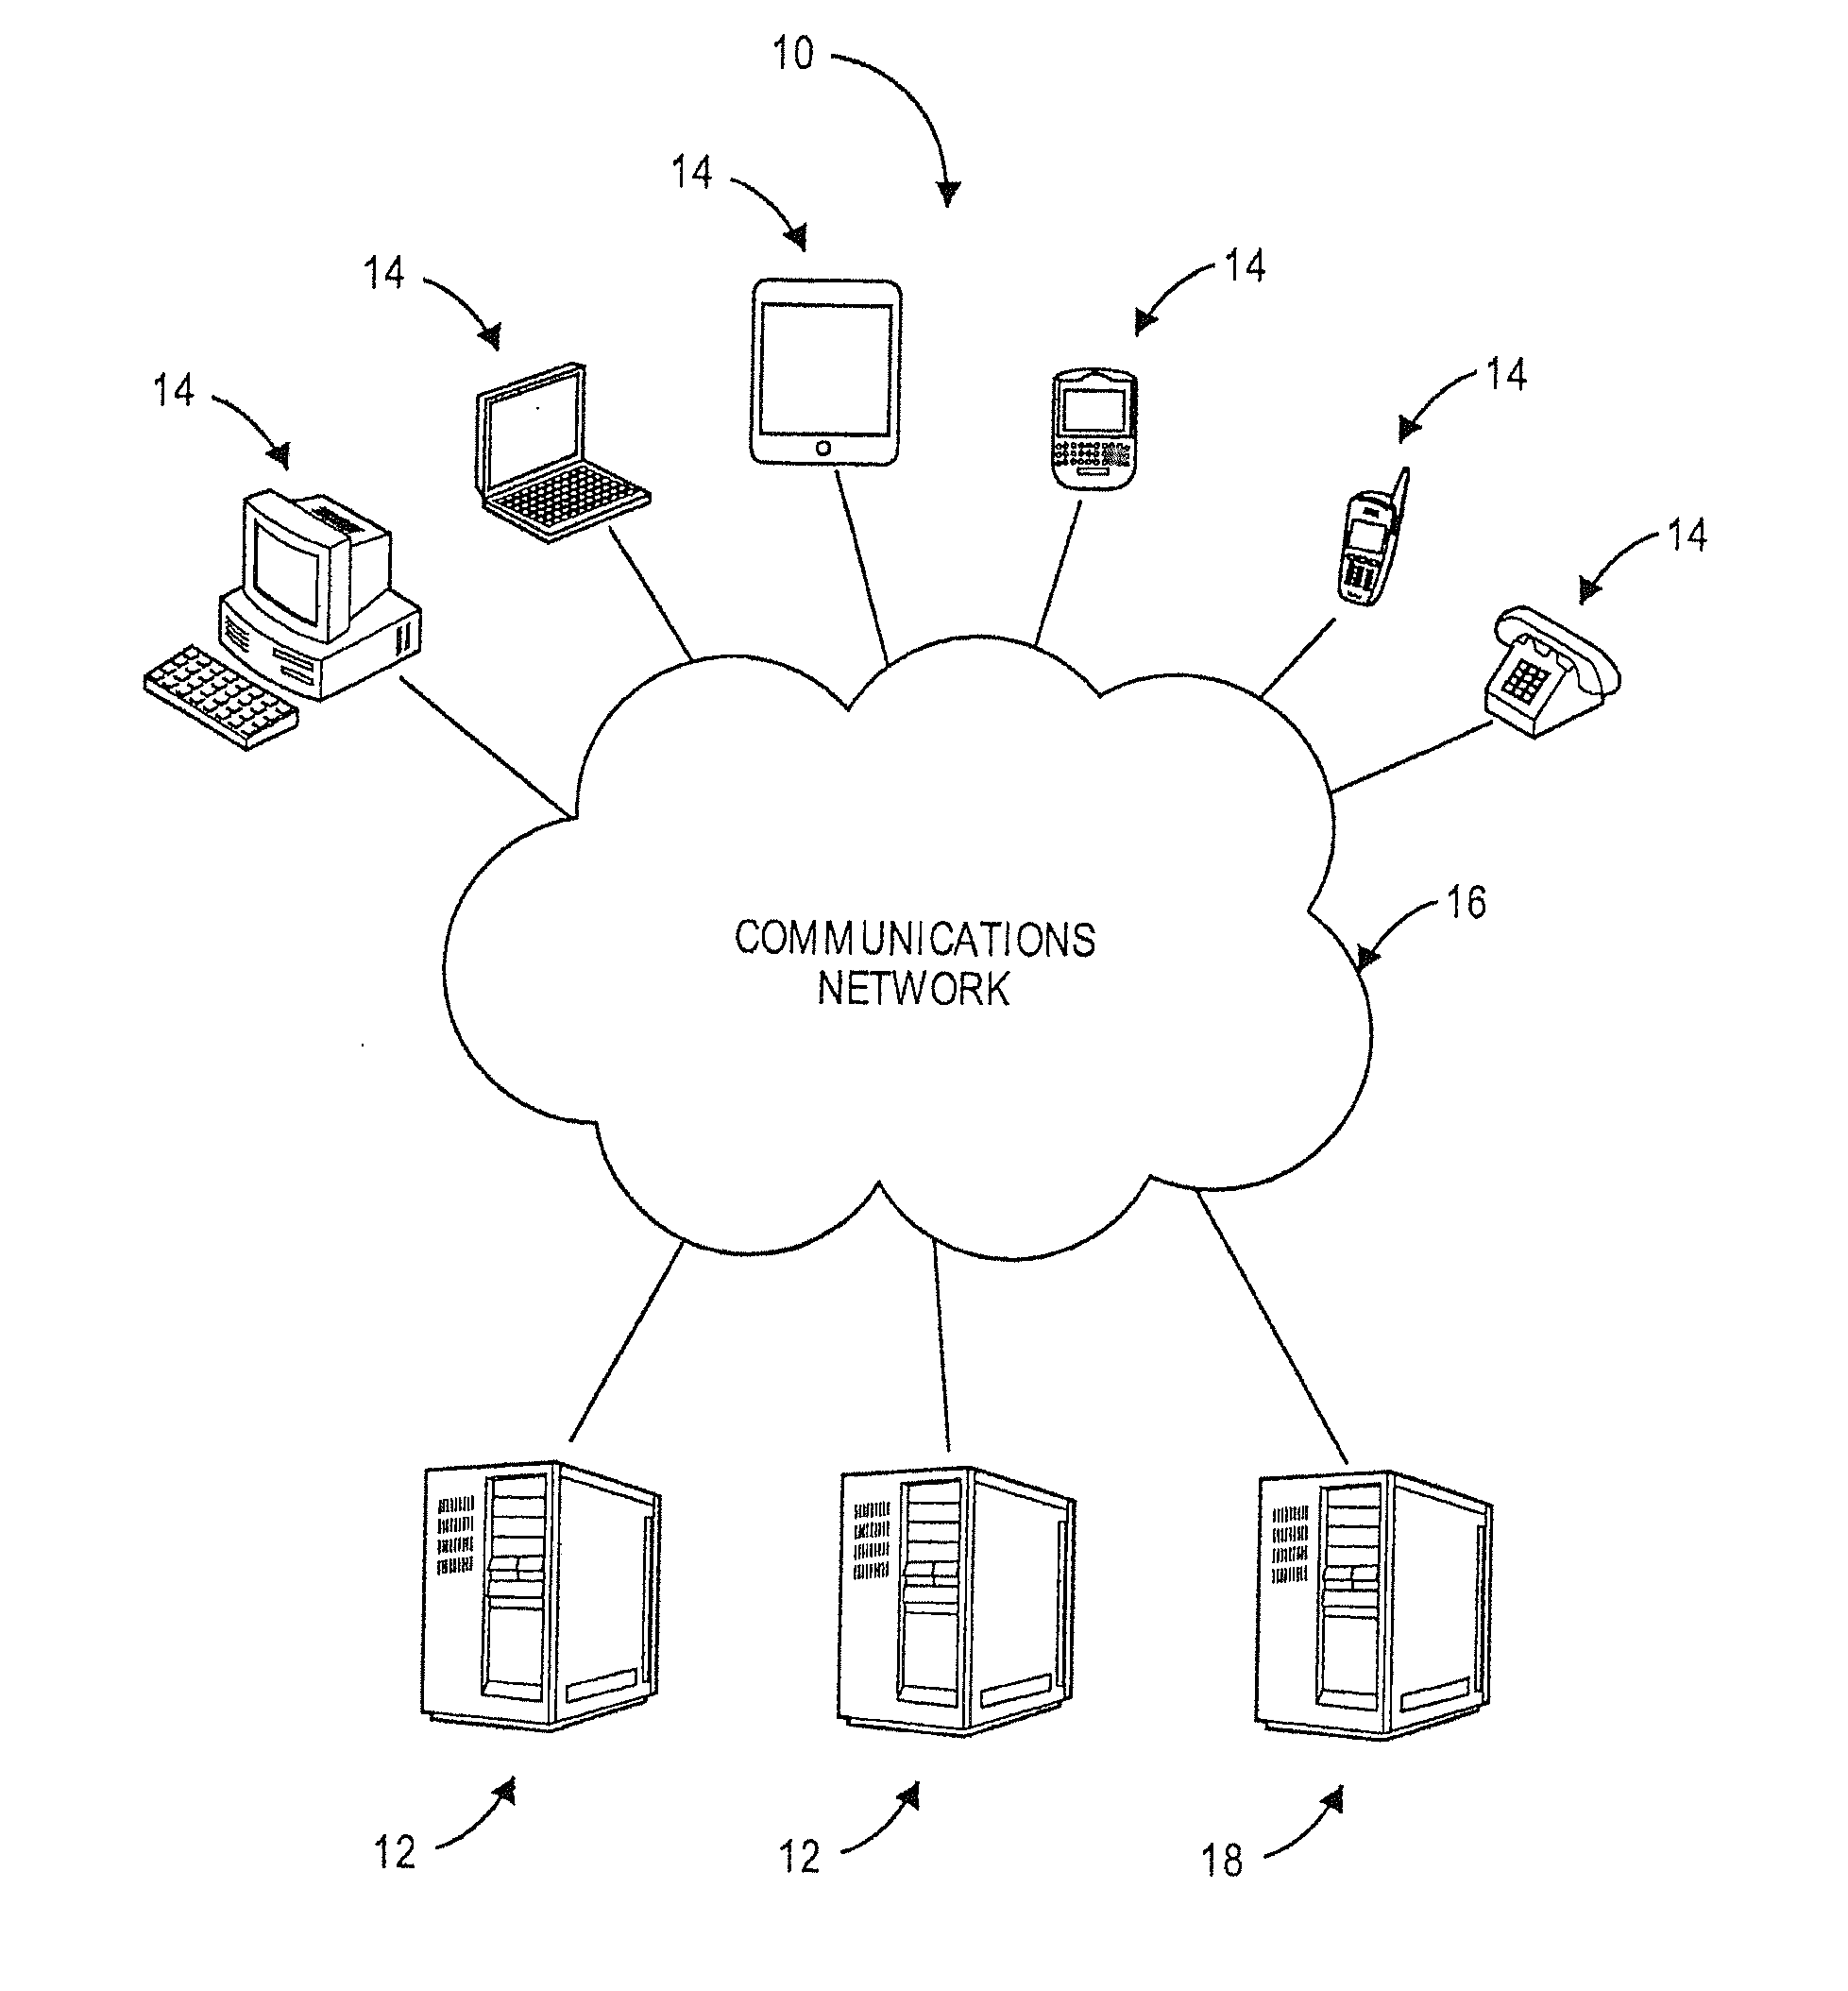 Computer program, method, and system for voice authentication of a user to access a secure resource